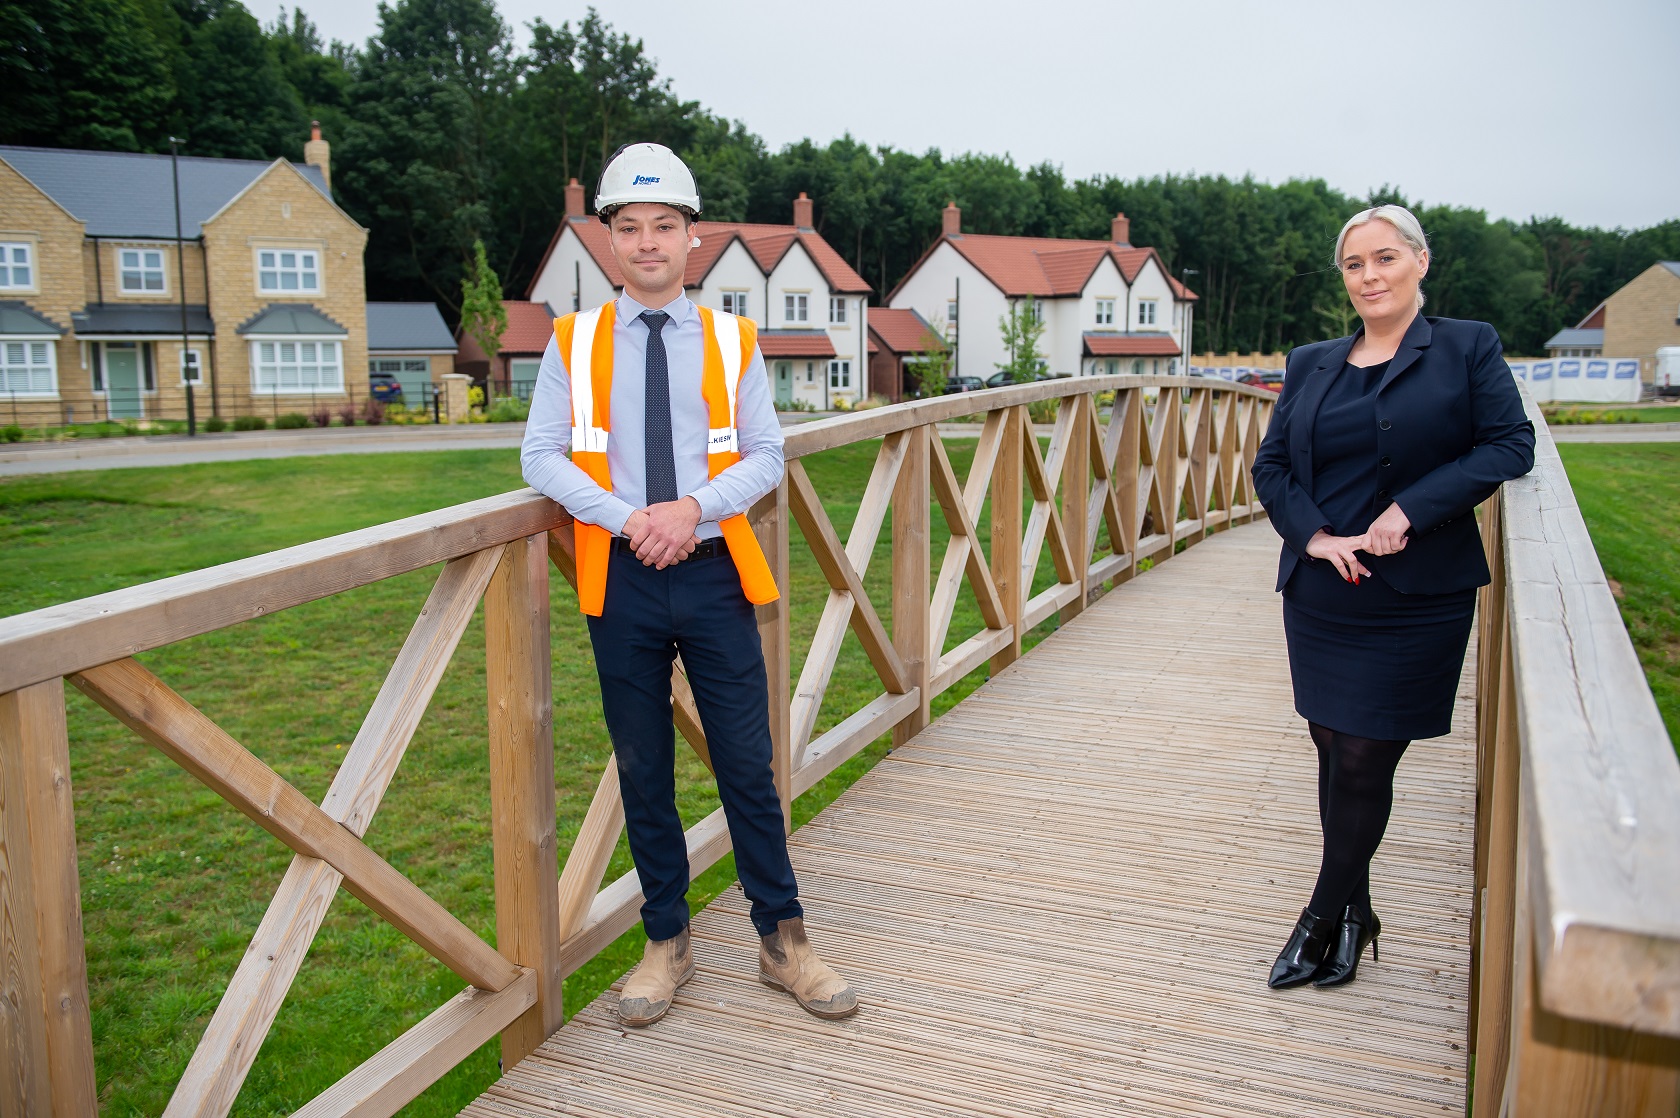 Meet the friendly faces creating Derbyshire’s newest village near Chesterfield